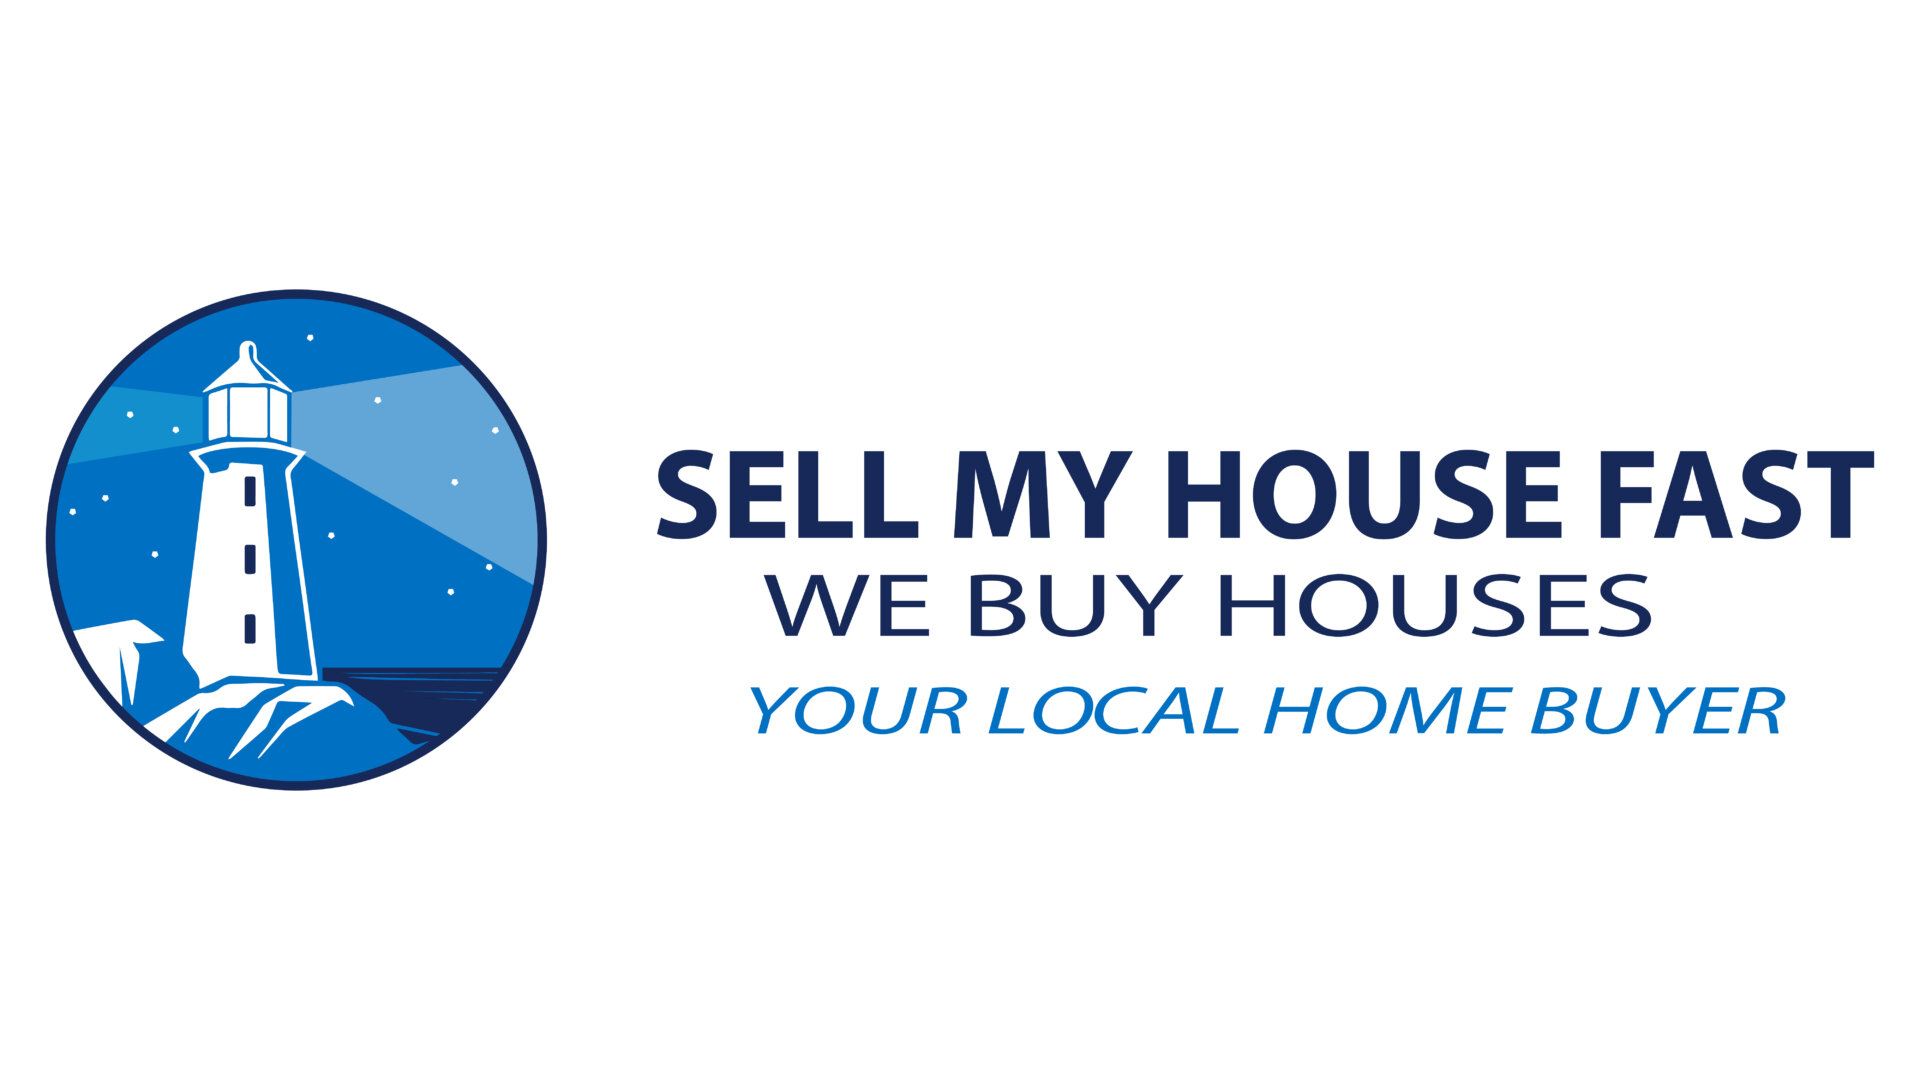 Sell My House Fast – We Buy Houses logo